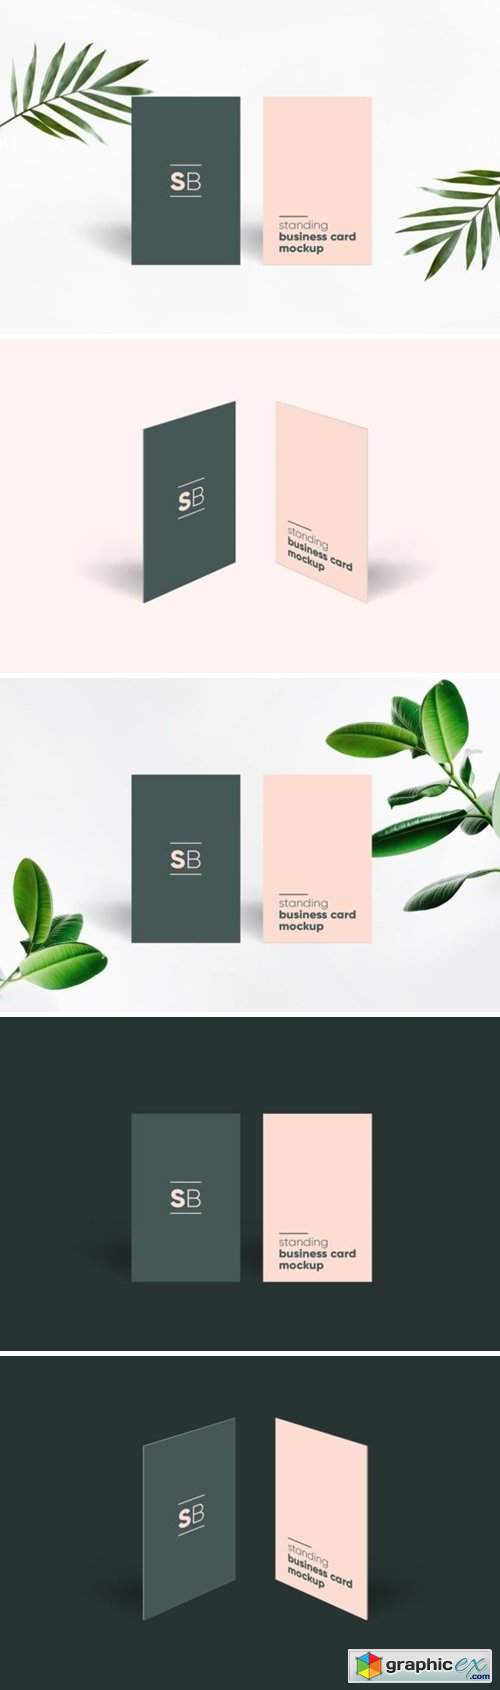  Standing Business Card Mockup 